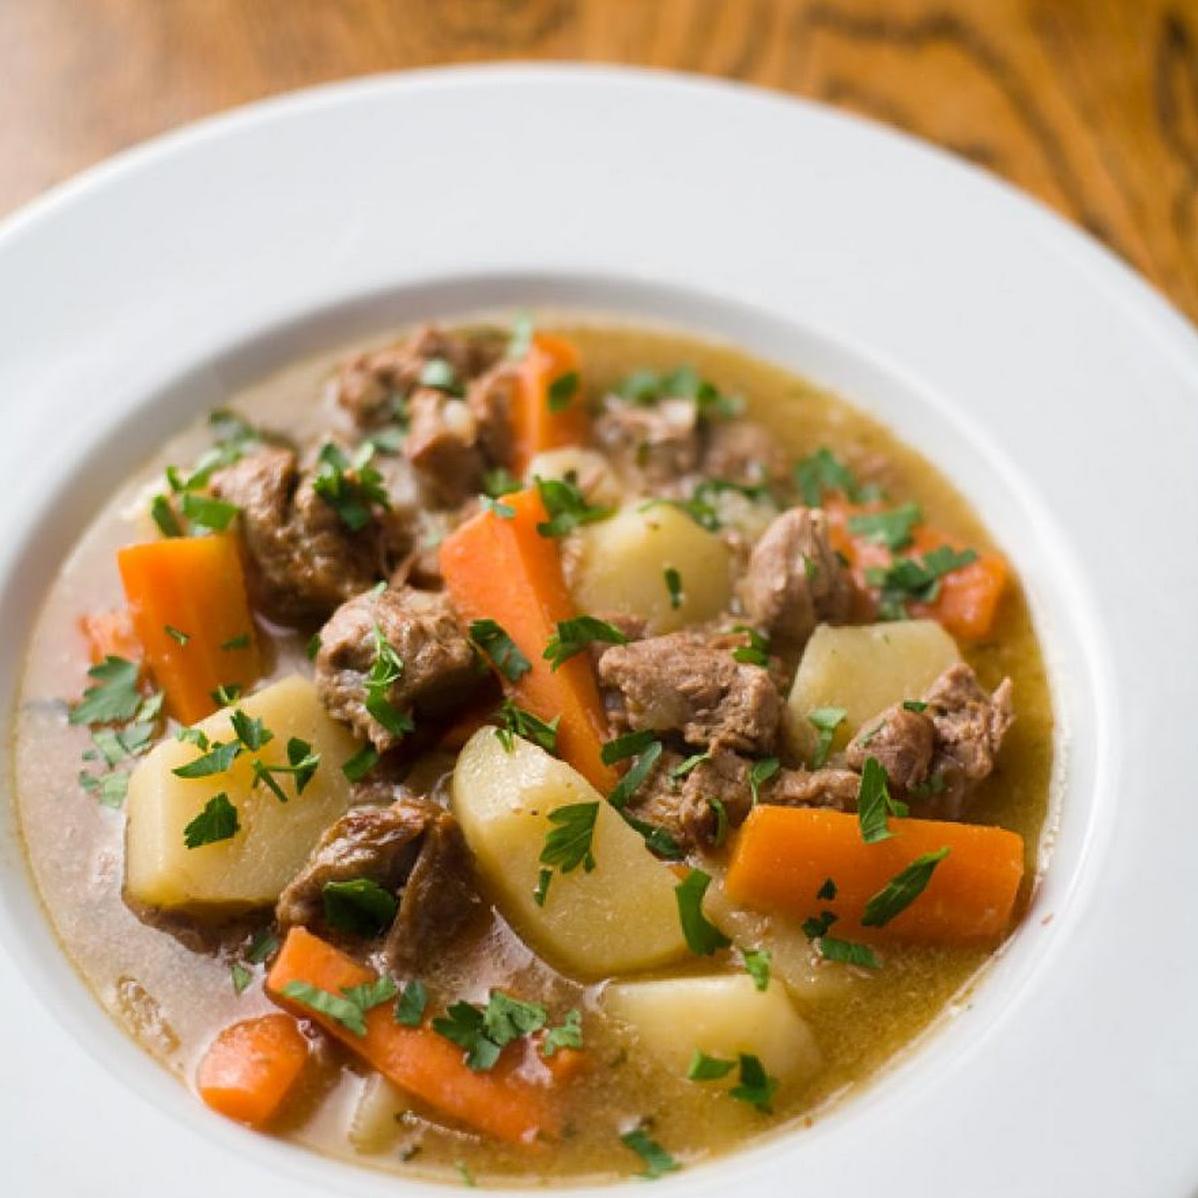  This hearty stew is the perfect comfort food for a cold, rainy day.